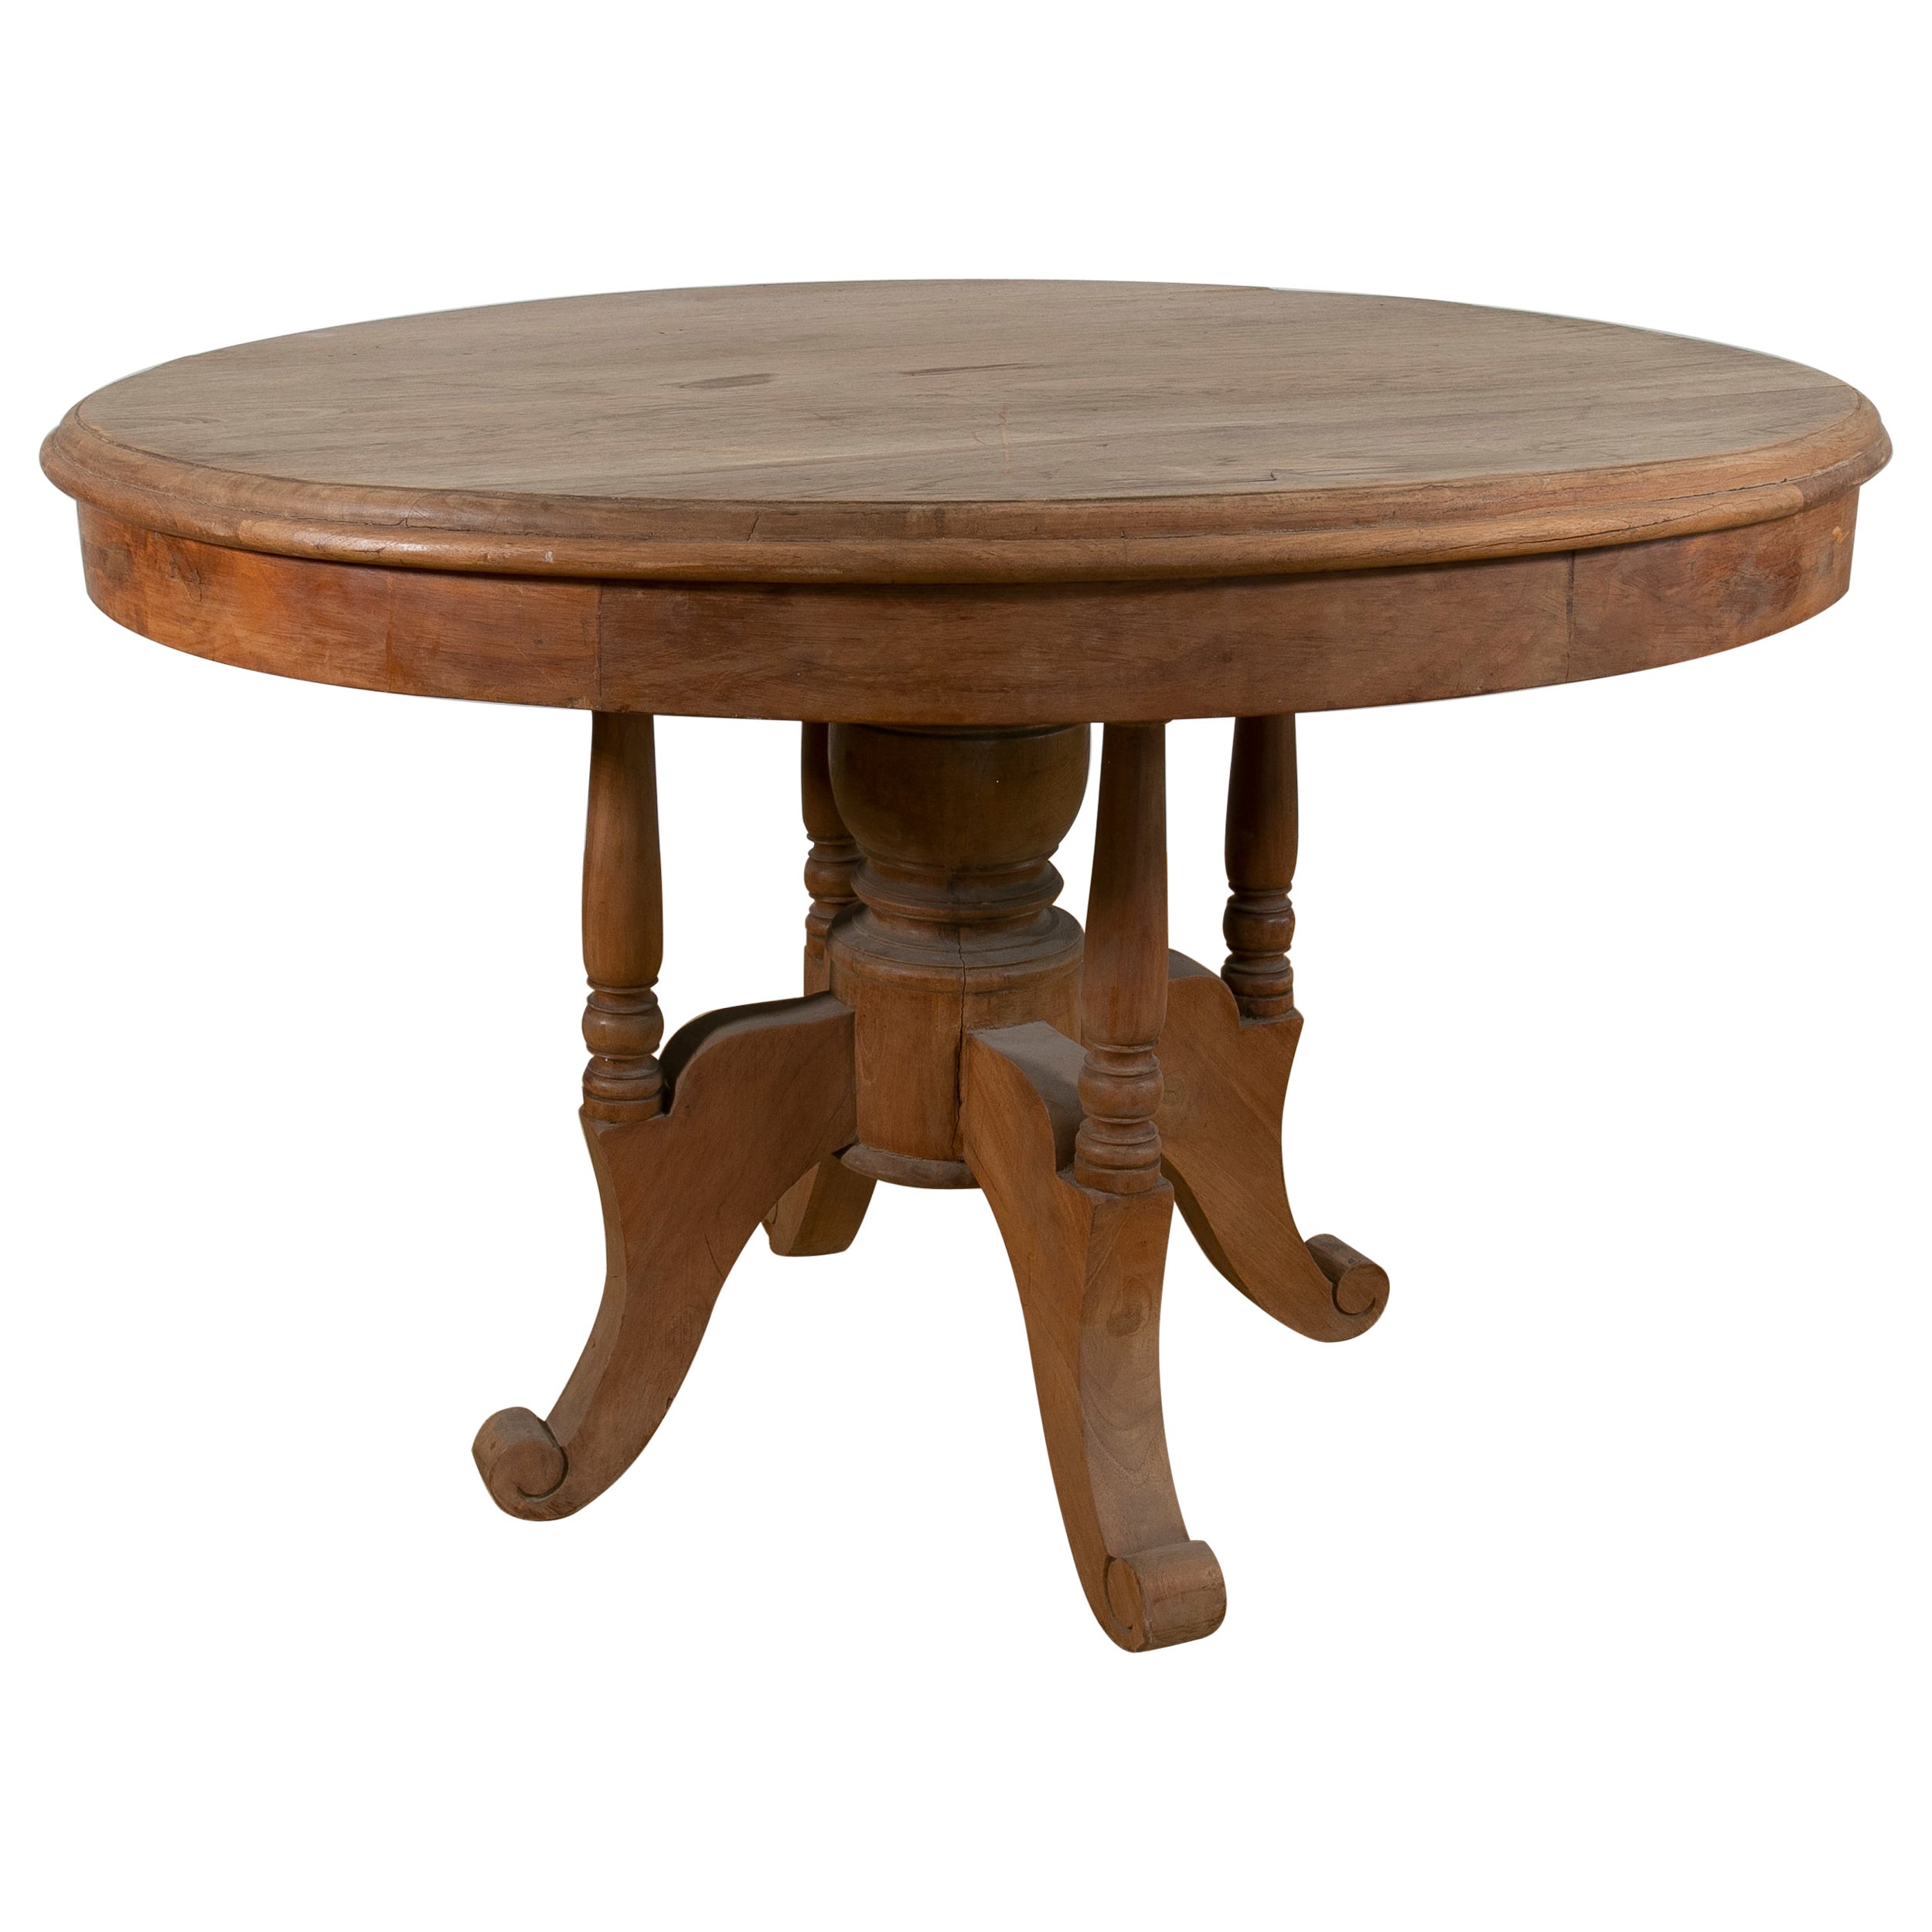 Spanish Round Table in Wood in the Original Colour with Turned Legs For Sale